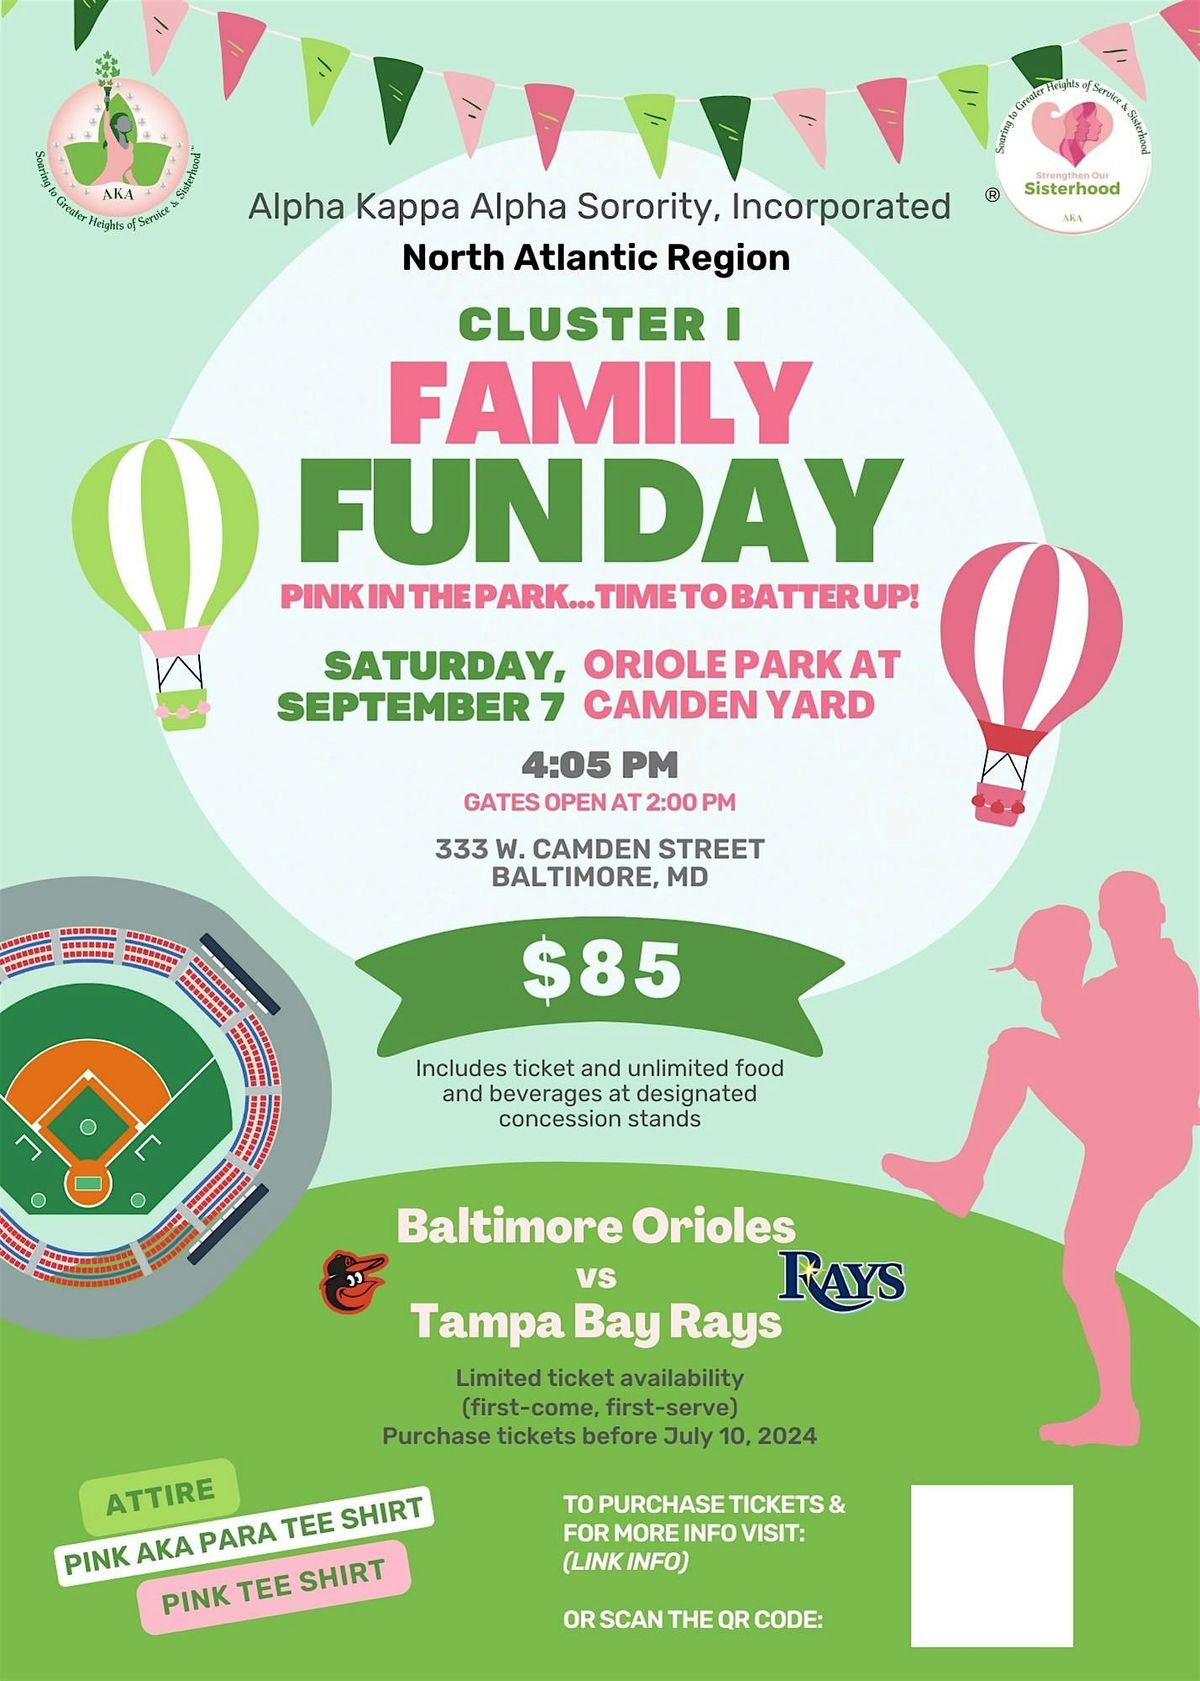 The Notable North Atlantic Region Cluster I Family Fun Day